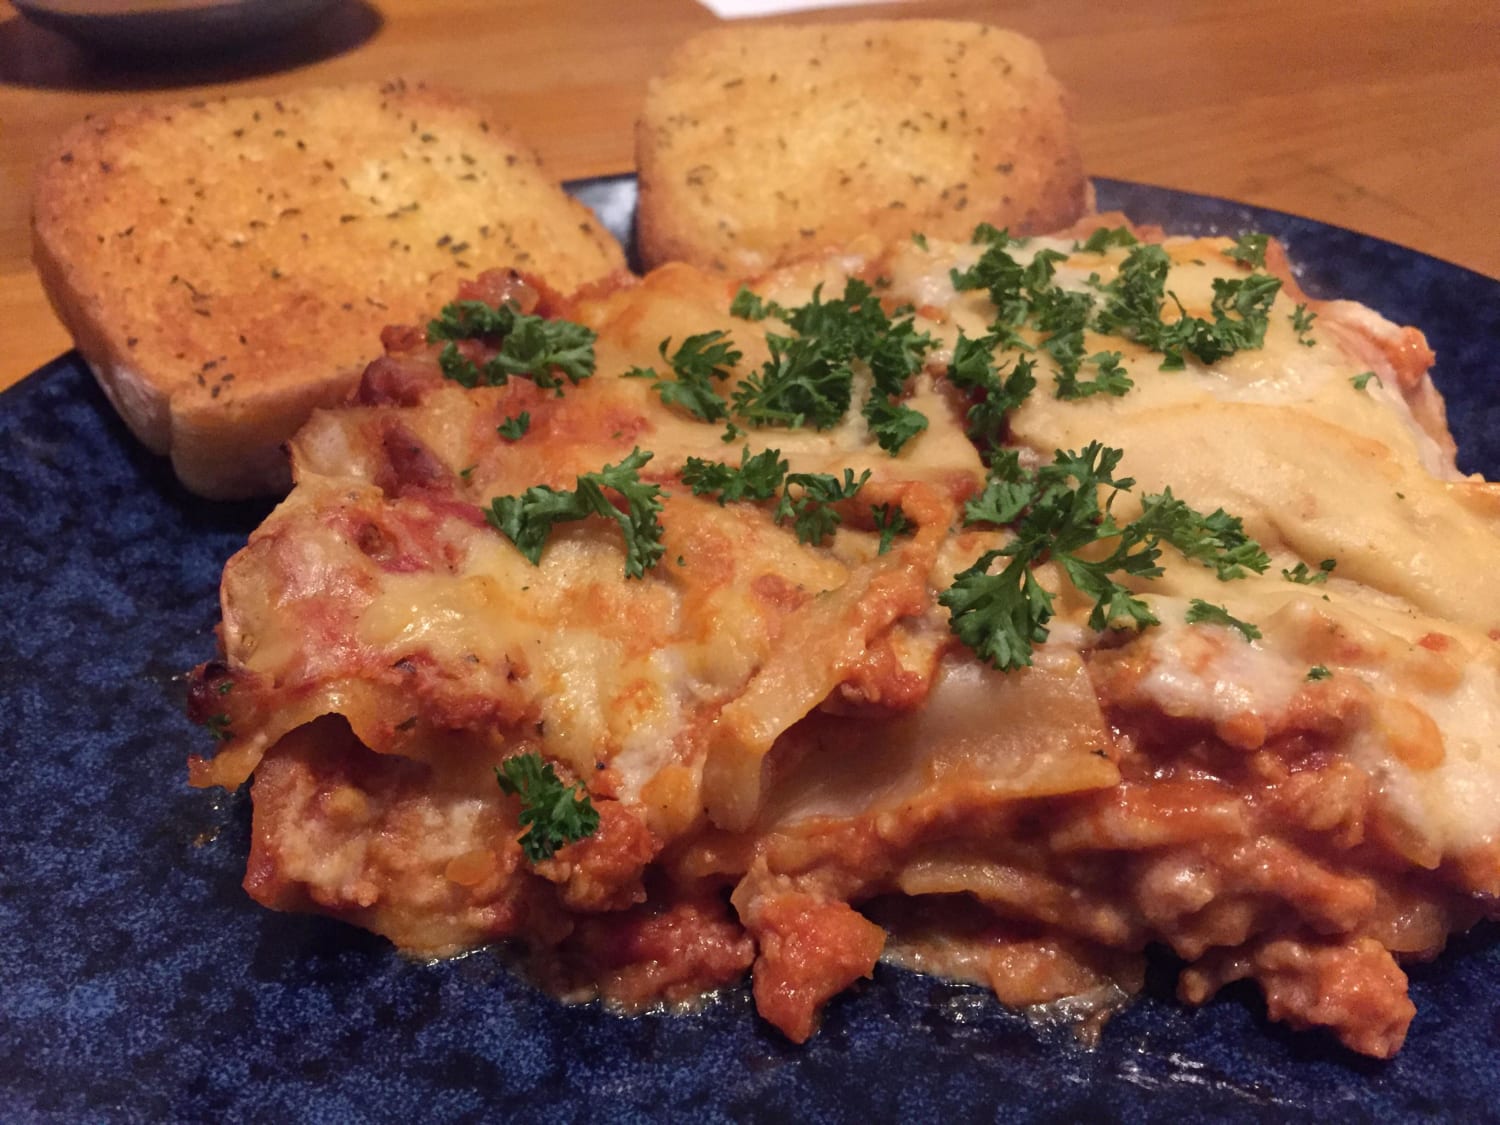 Hey Team! Just showing off my first attempt at a lasagna- Recipe from The Edgy Veg